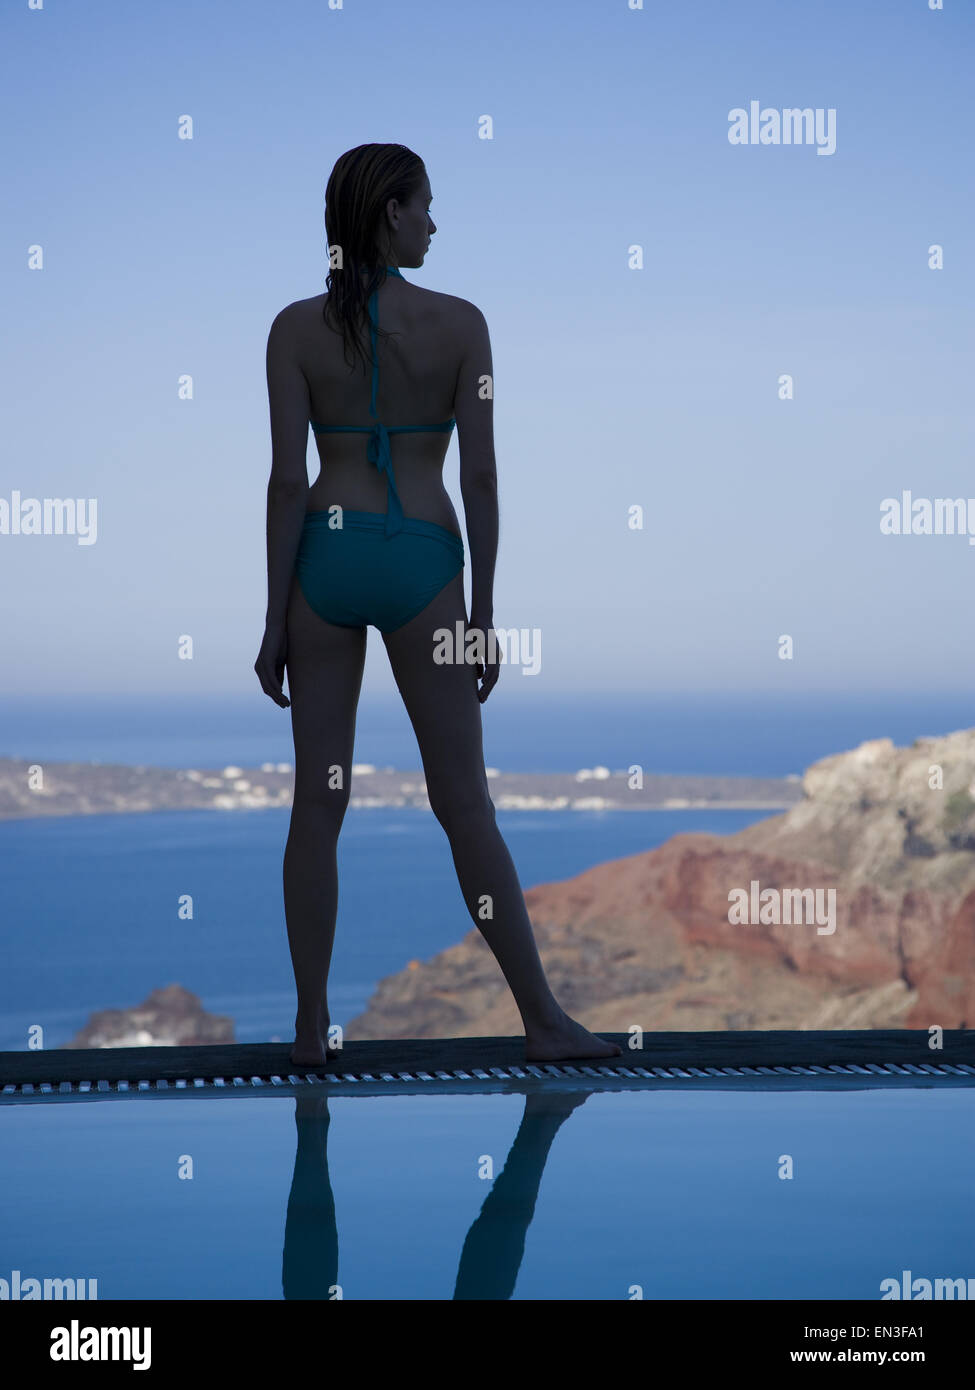 Rear view silhouette of woman in bikini standing at edge of infinity pool with rock formation Stock Photo